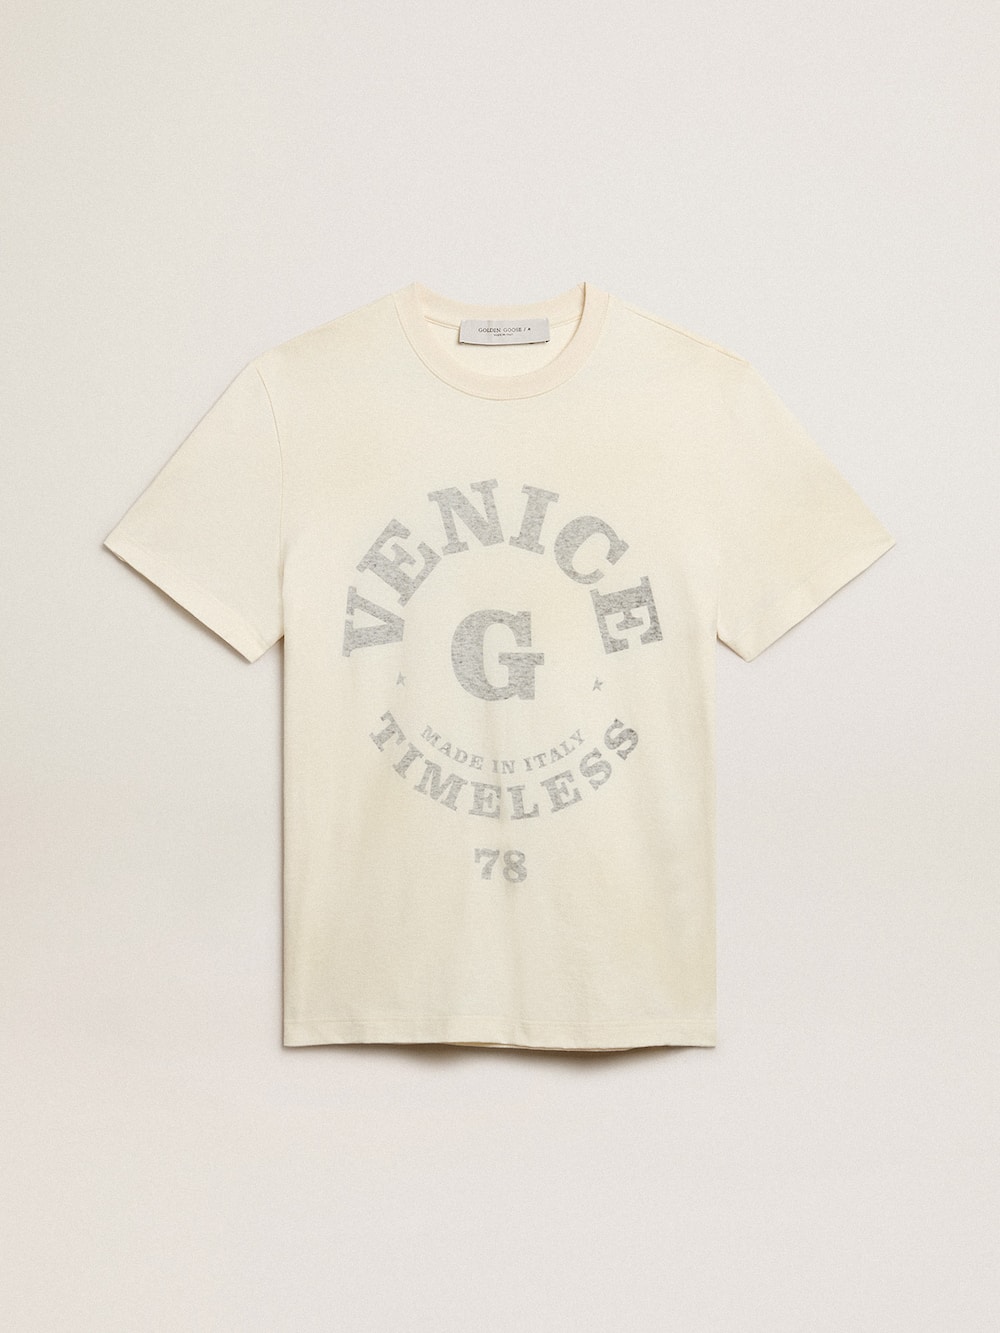 Golden Goose - Men’s cotton T-shirt in aged white with faded lettering  in 